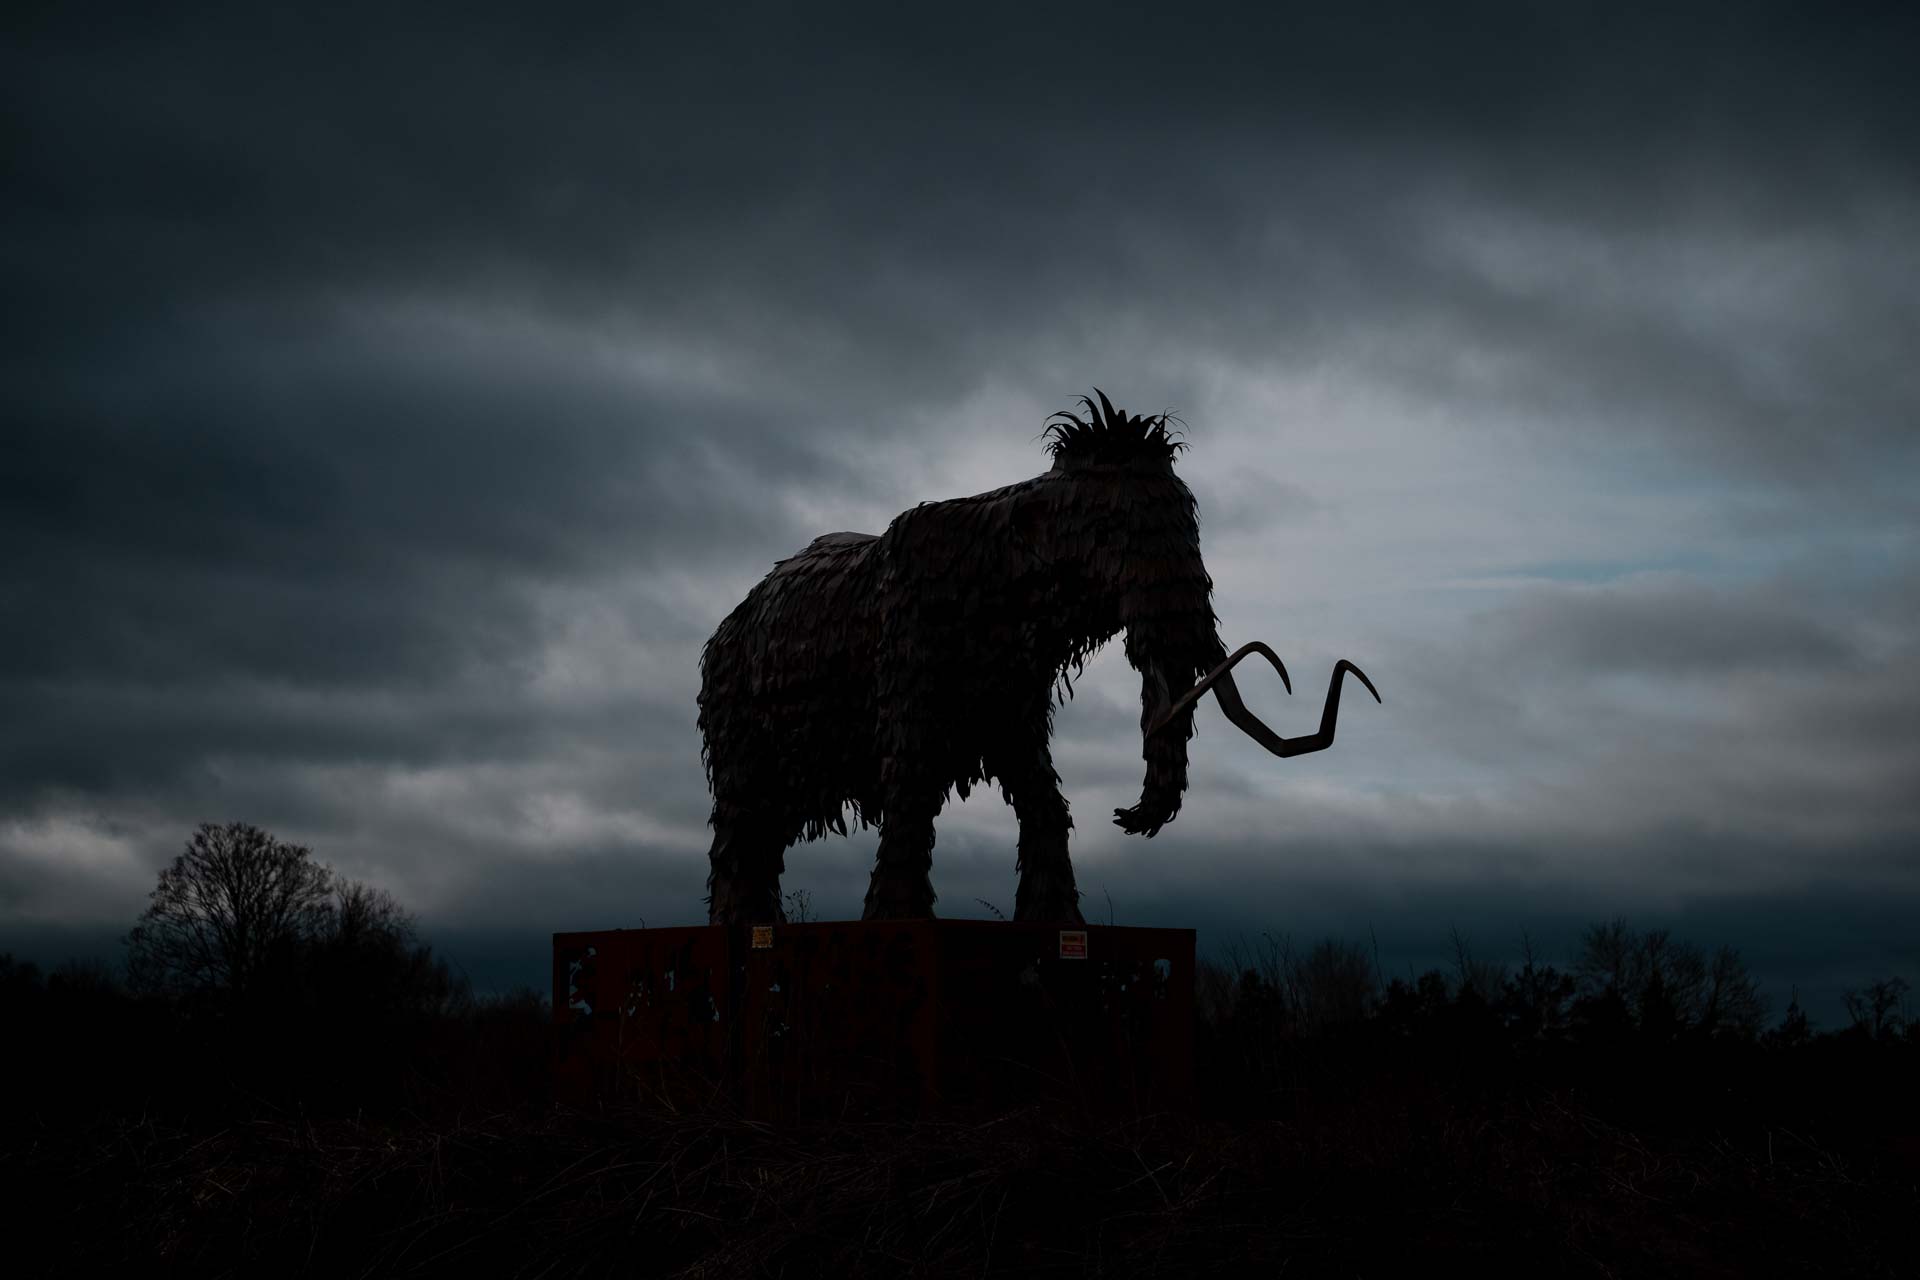 Shropshire Sculpture Park - a Wooly Mammoth in the Extinction Trail